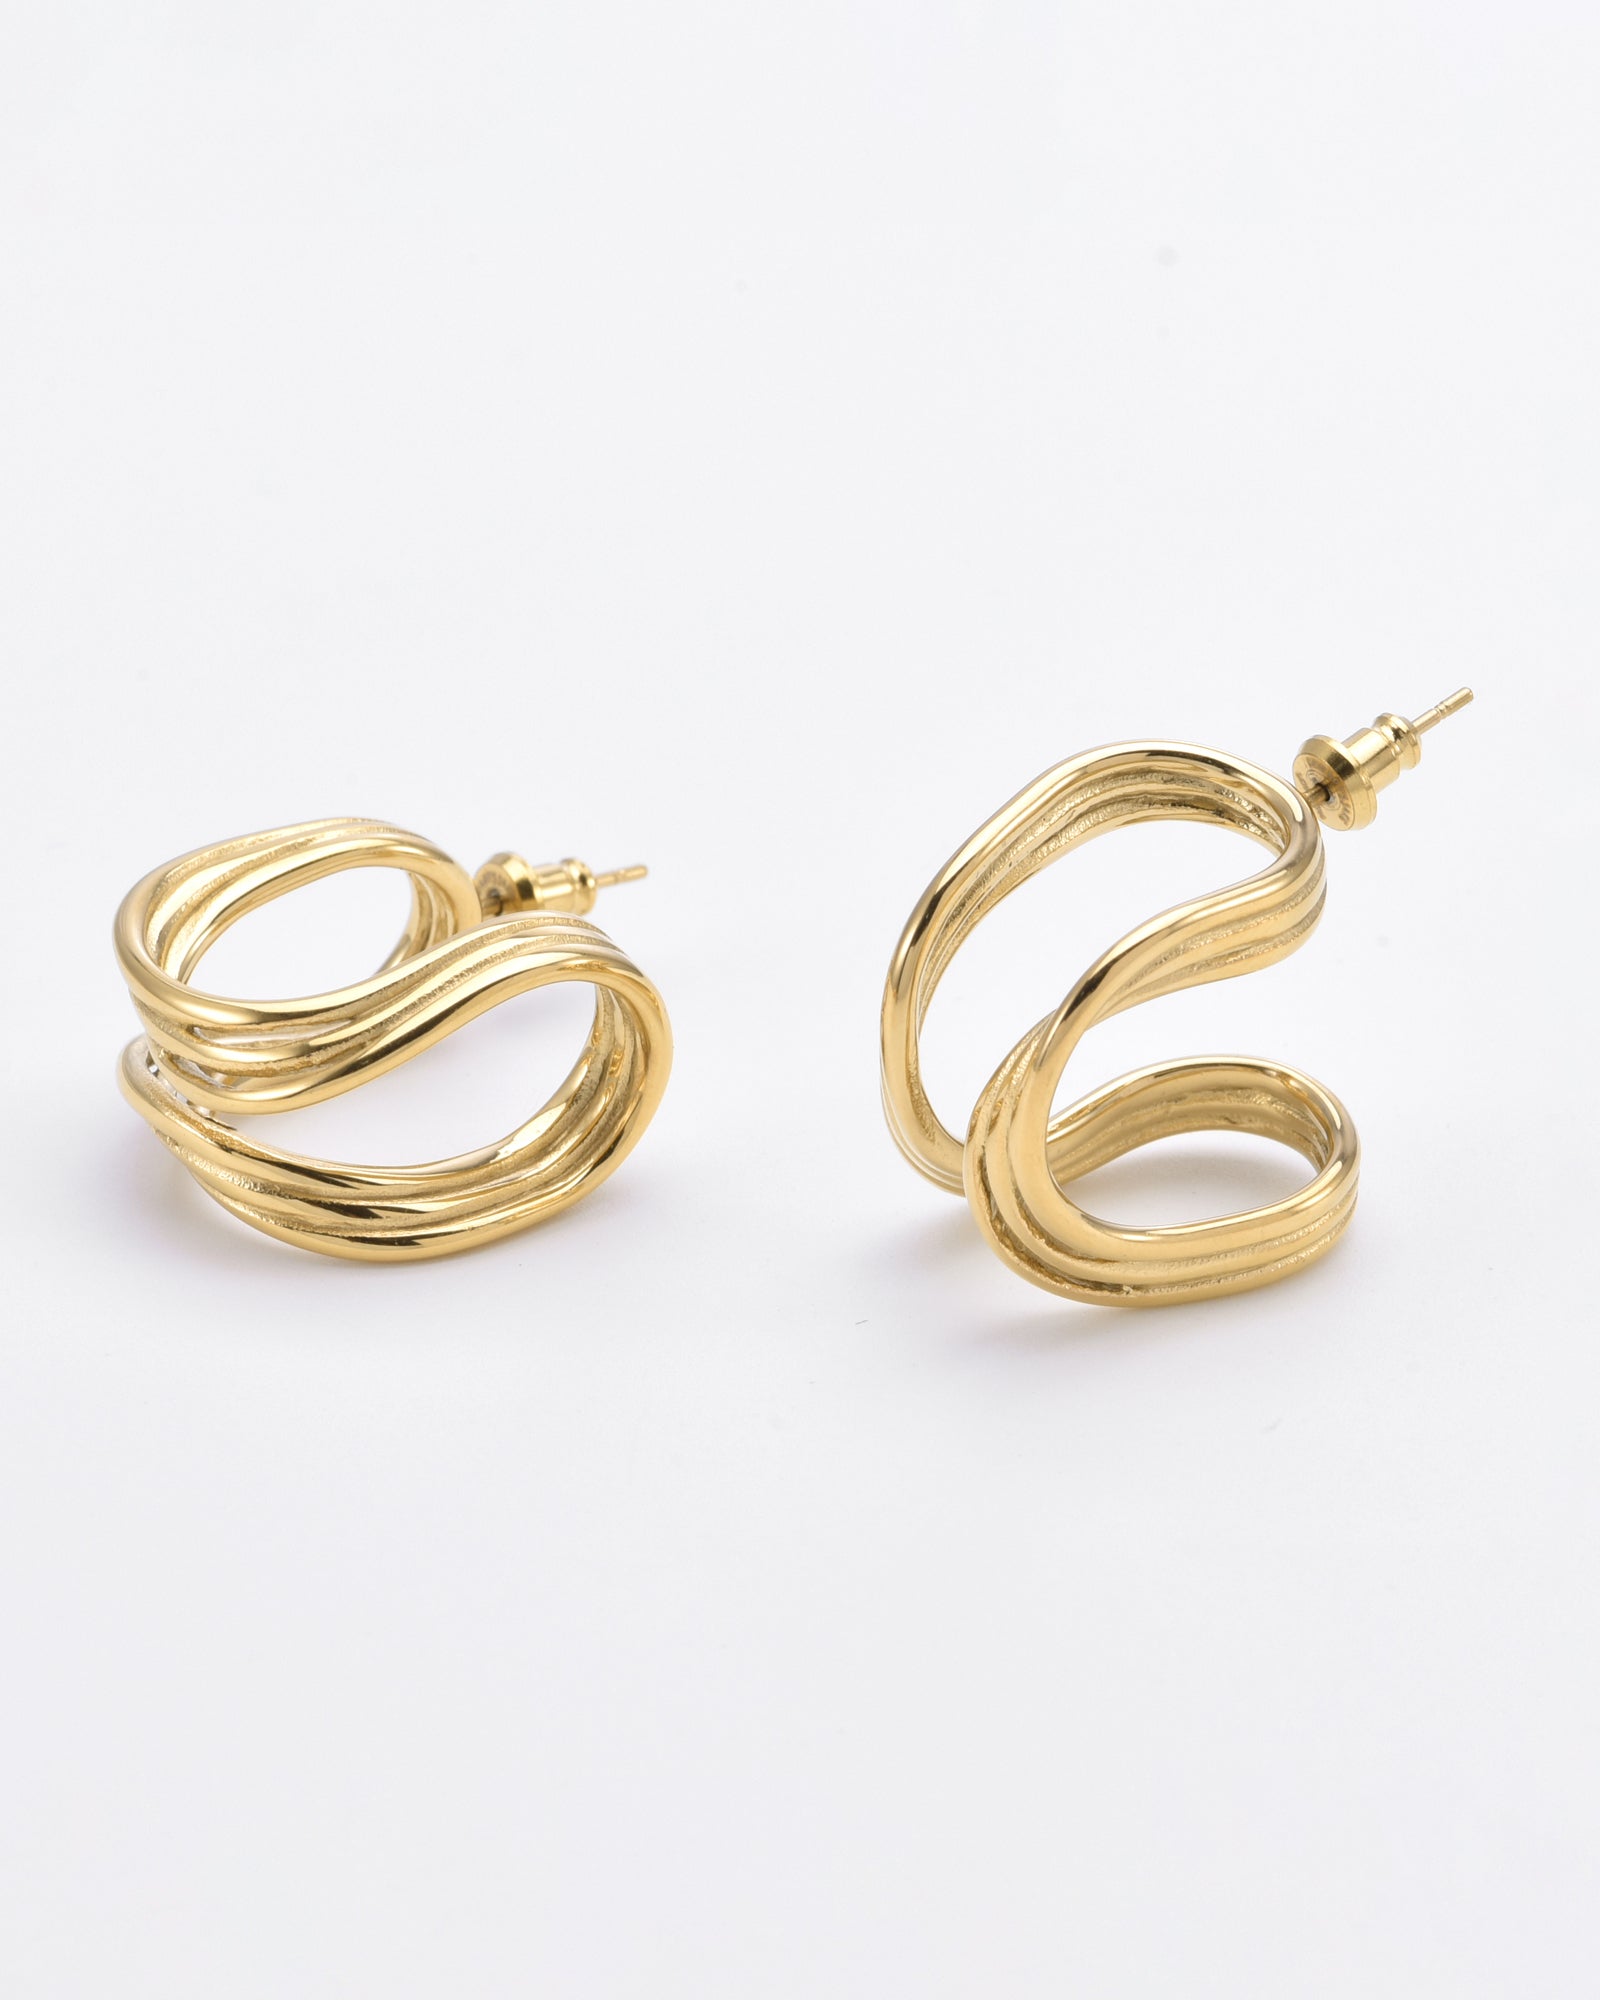 A pair of 24k gold, twisted hoop earrings with a smooth and shiny finish. Each Portrait Earrings Gold by For Art's Sake® features a unique, wavy design with an interwoven loop pattern. The earrings have standard posts for pierced ears and are displayed against a plain white background.